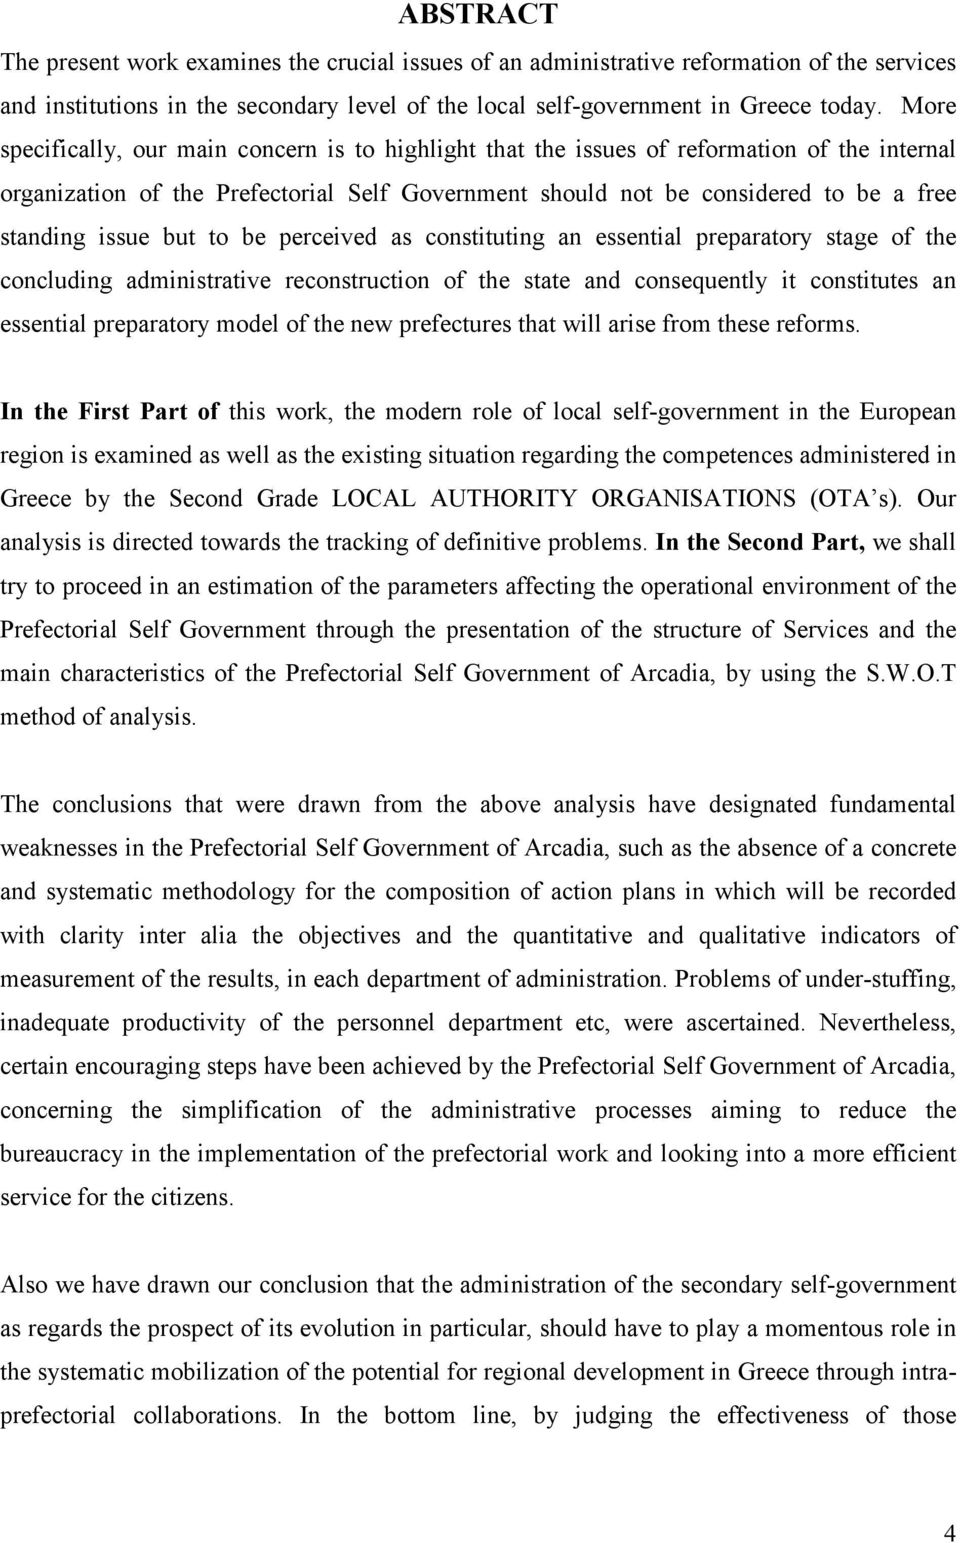 issue but to be perceived as constituting an essential preparatory stage of the concluding administrative reconstruction of the state and consequently it constitutes an essential preparatory model of